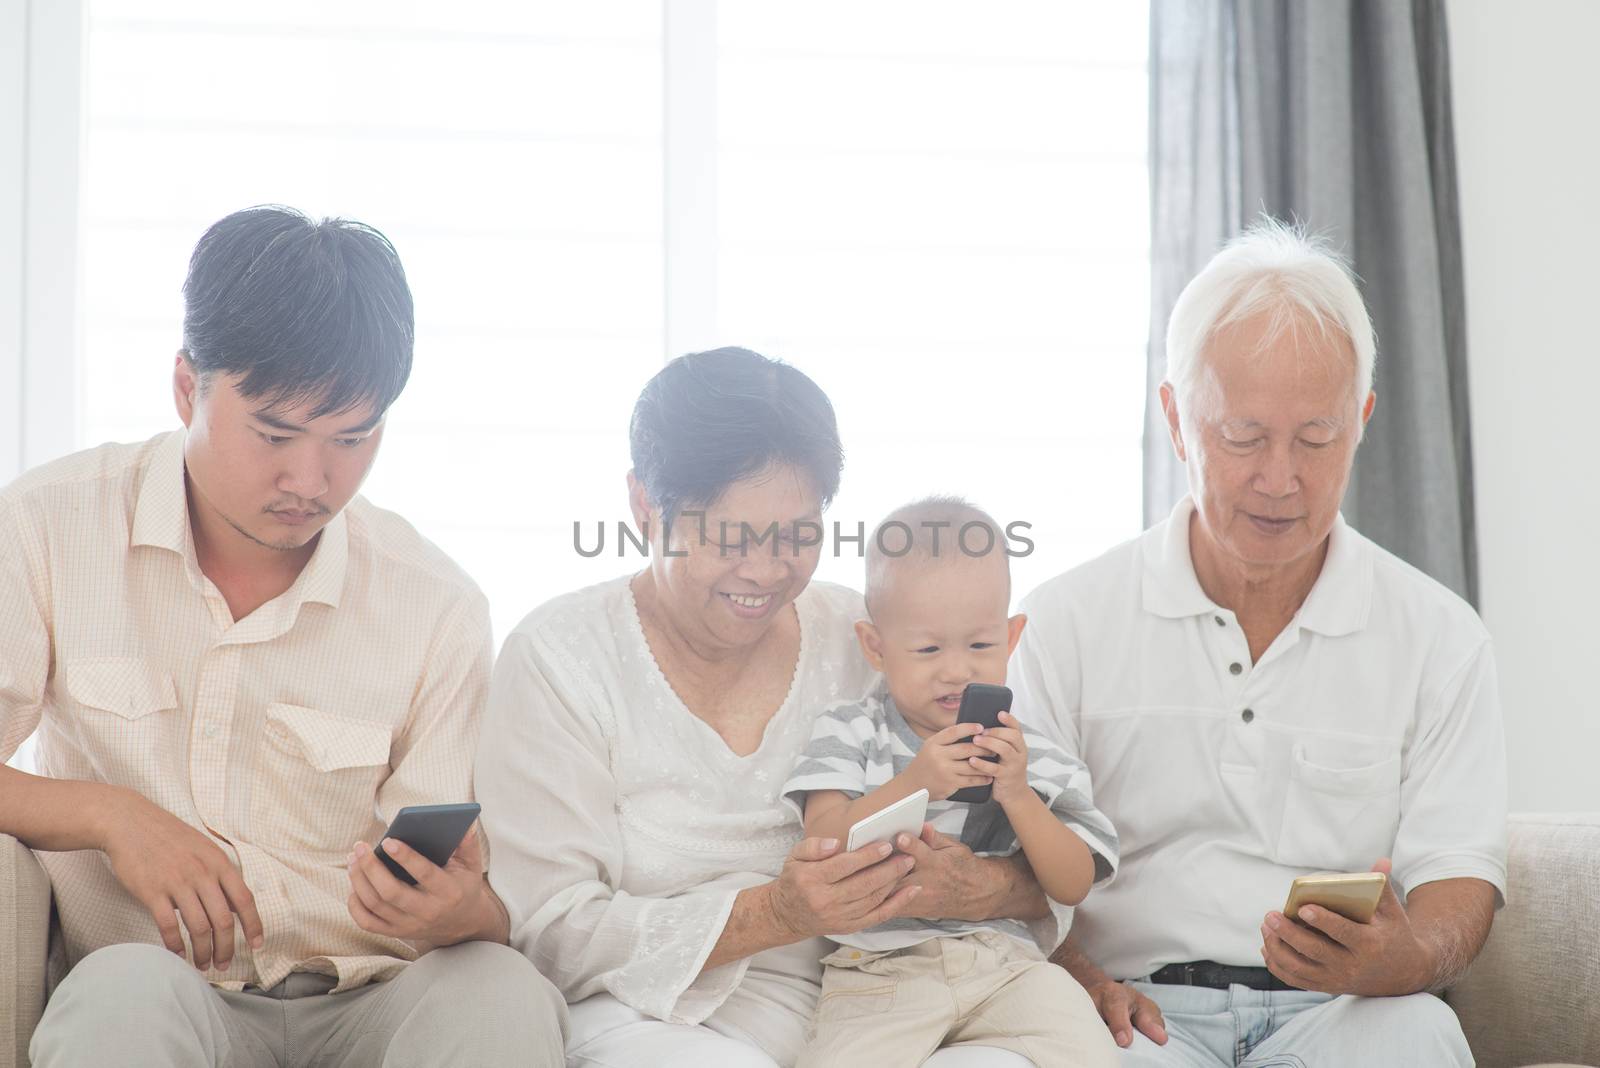 Technology, gadgets addicted family. Member family busy with their smart phone, communication problem.